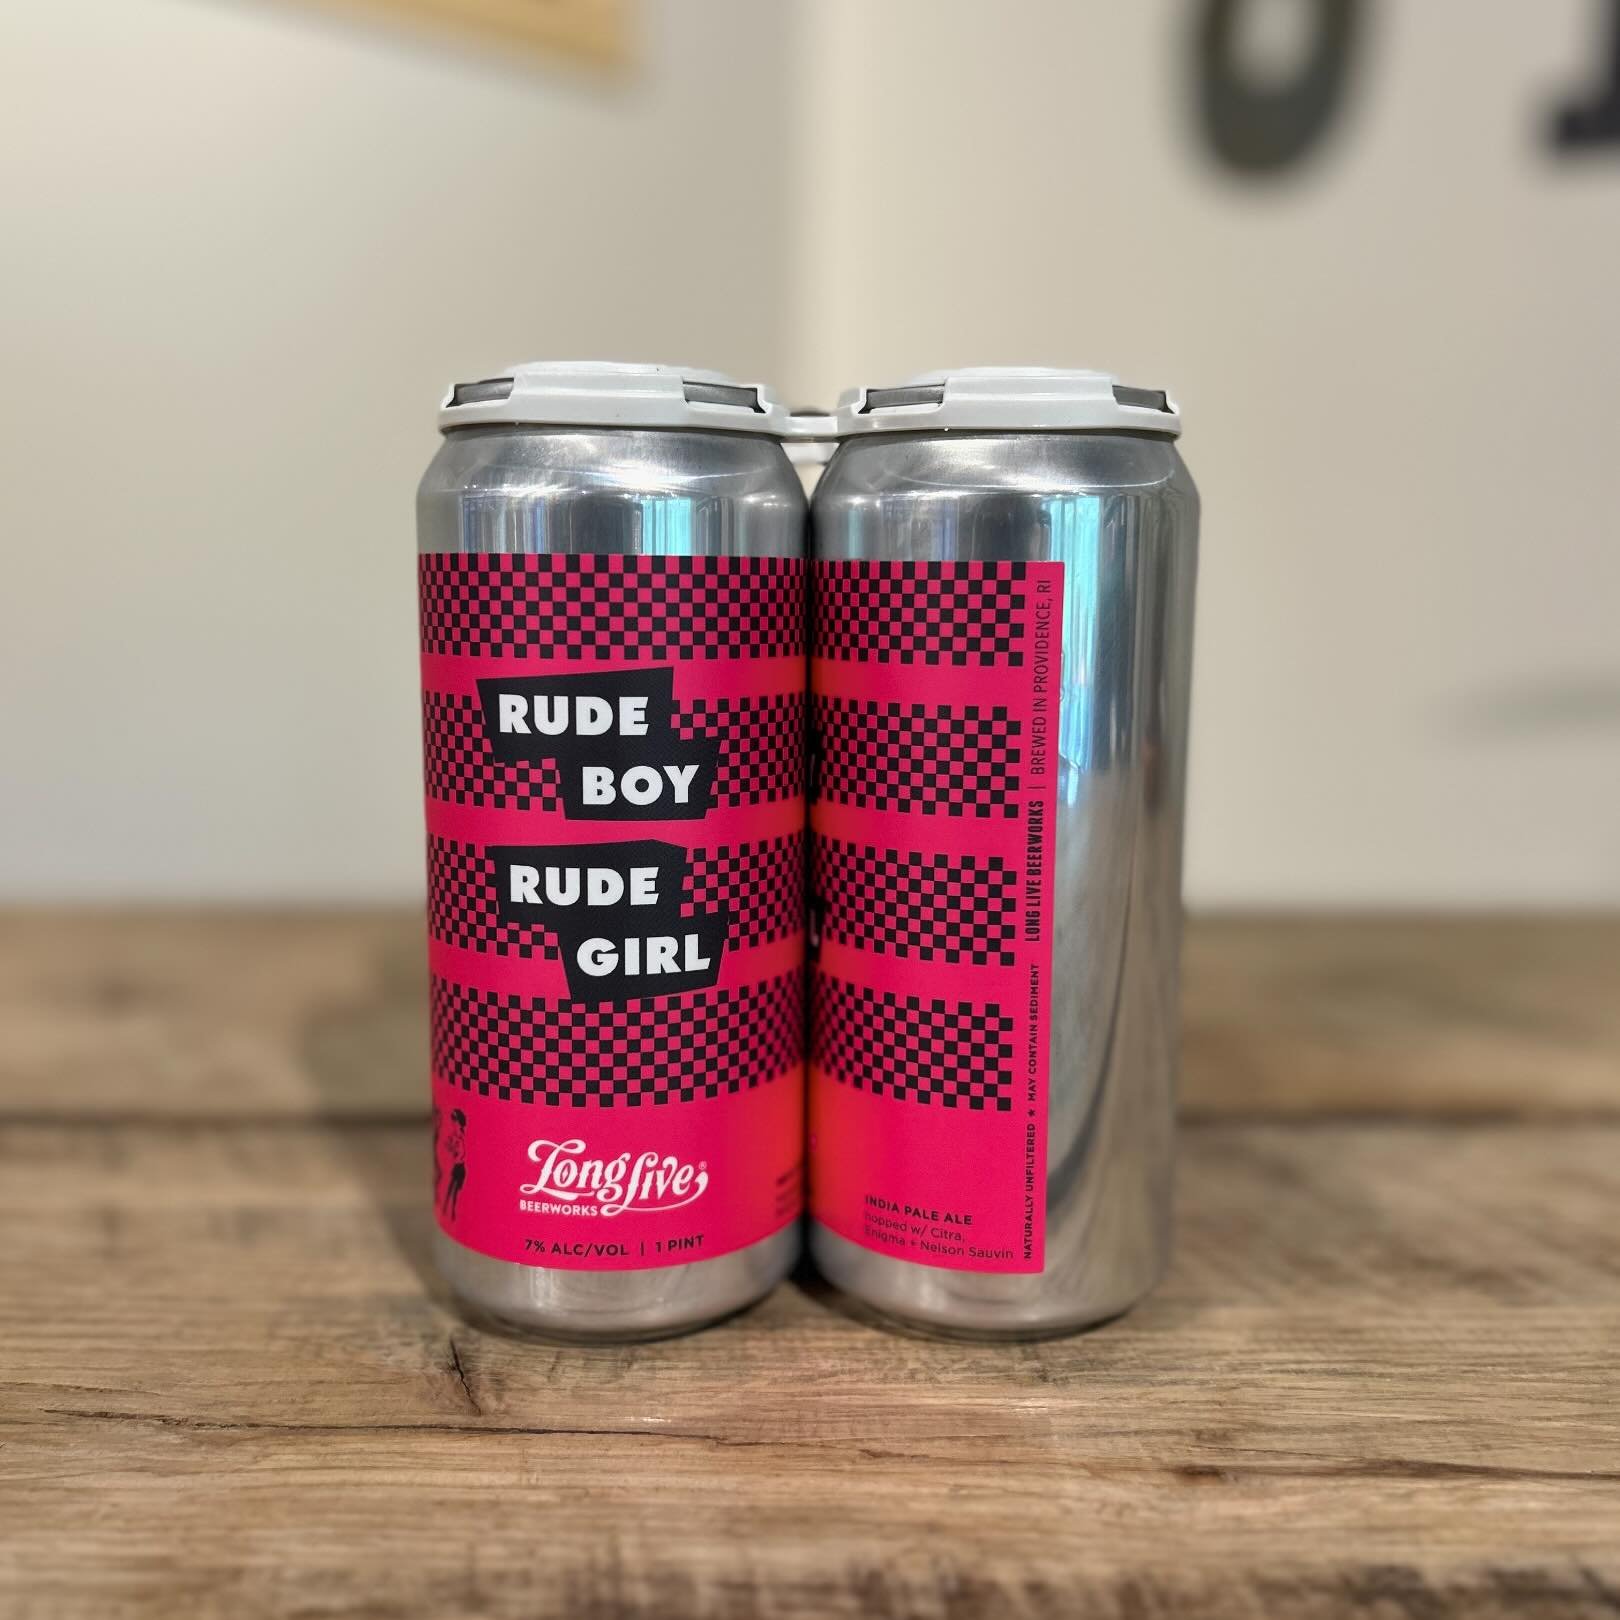 @longlivebeerworks is back in the shop this week #NowAvailable #SudburyCraftBeet #DrinkLocal
&mdash;
Rude Boy Rude Girl

A fresh IPA hopped w/ Citra, Enigma, Nelson Sauvin + Nelson Sauvin Cryo. 7%

Rude Boy Rude Girl features aromas of citrus, melon 